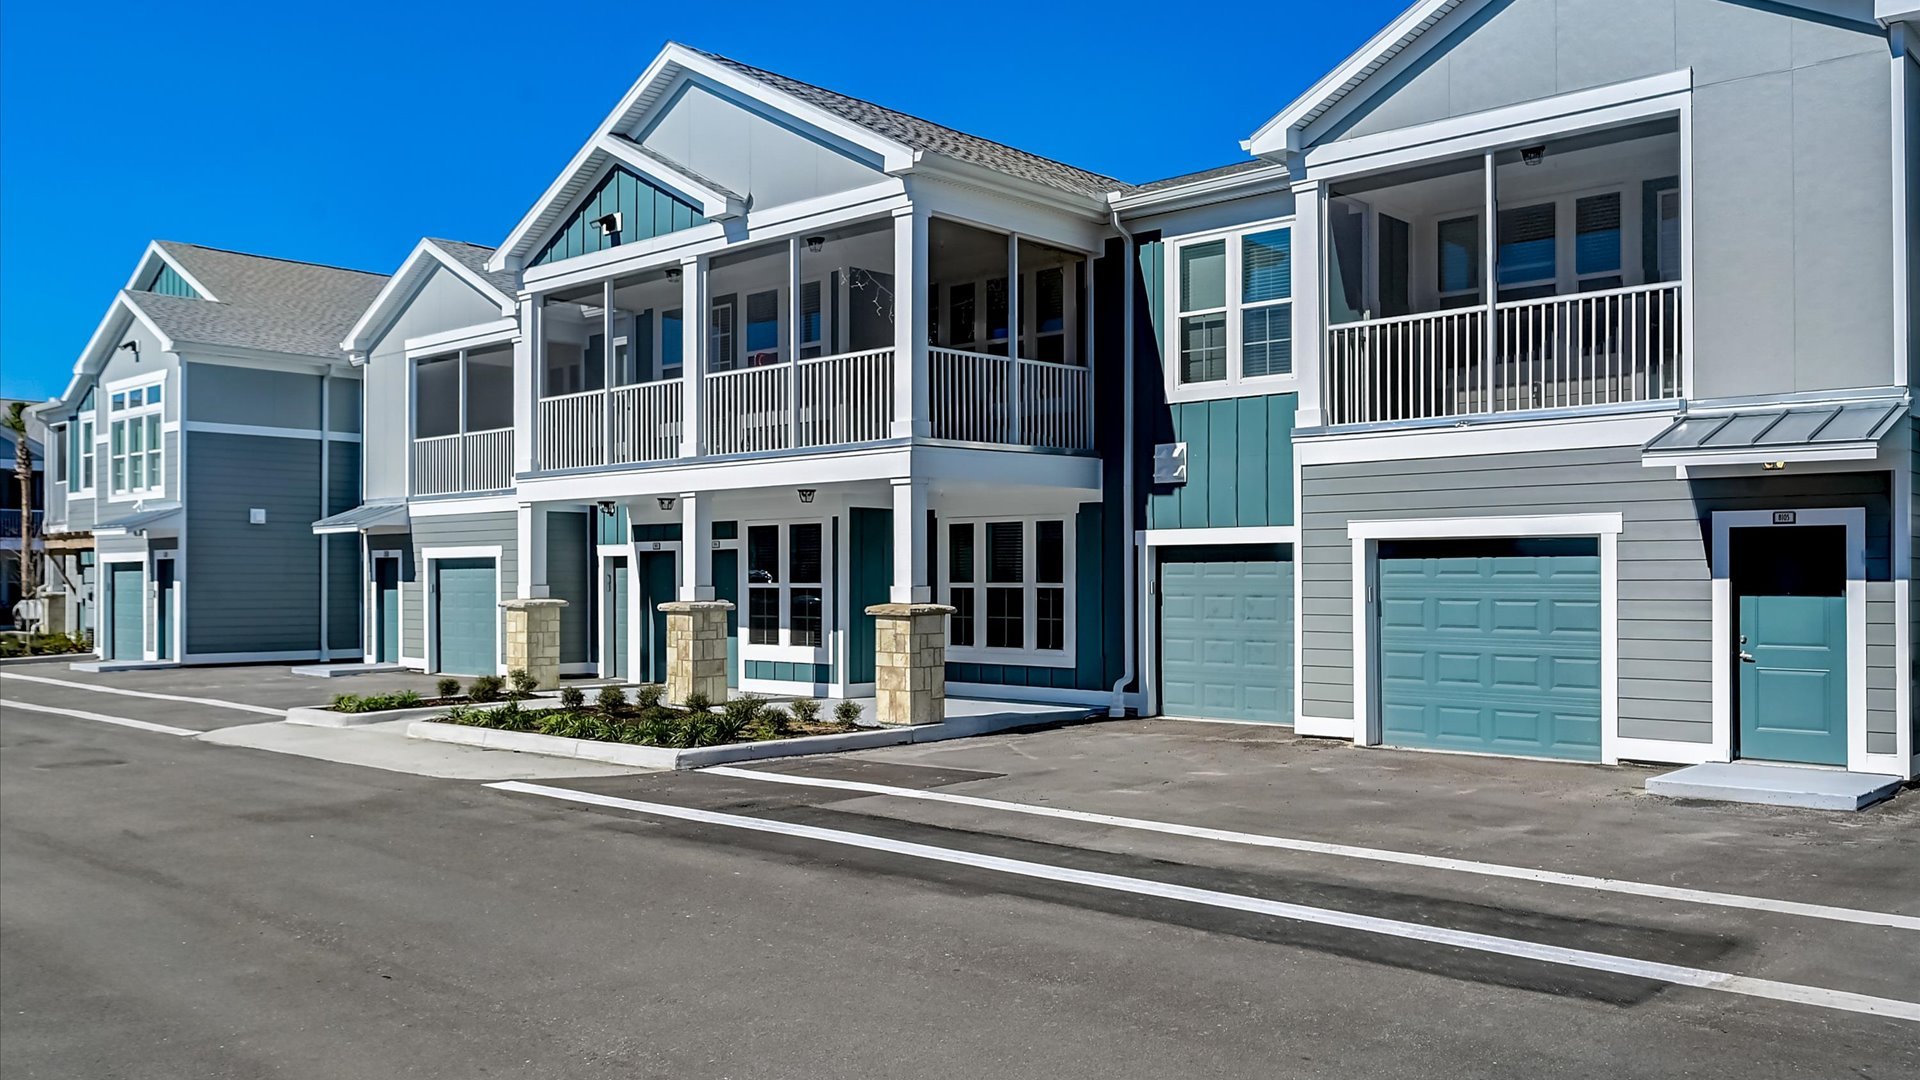 Townhome with Direct Entry and Garages Springs at Flagler Center Apartments in Jacksonville, FL